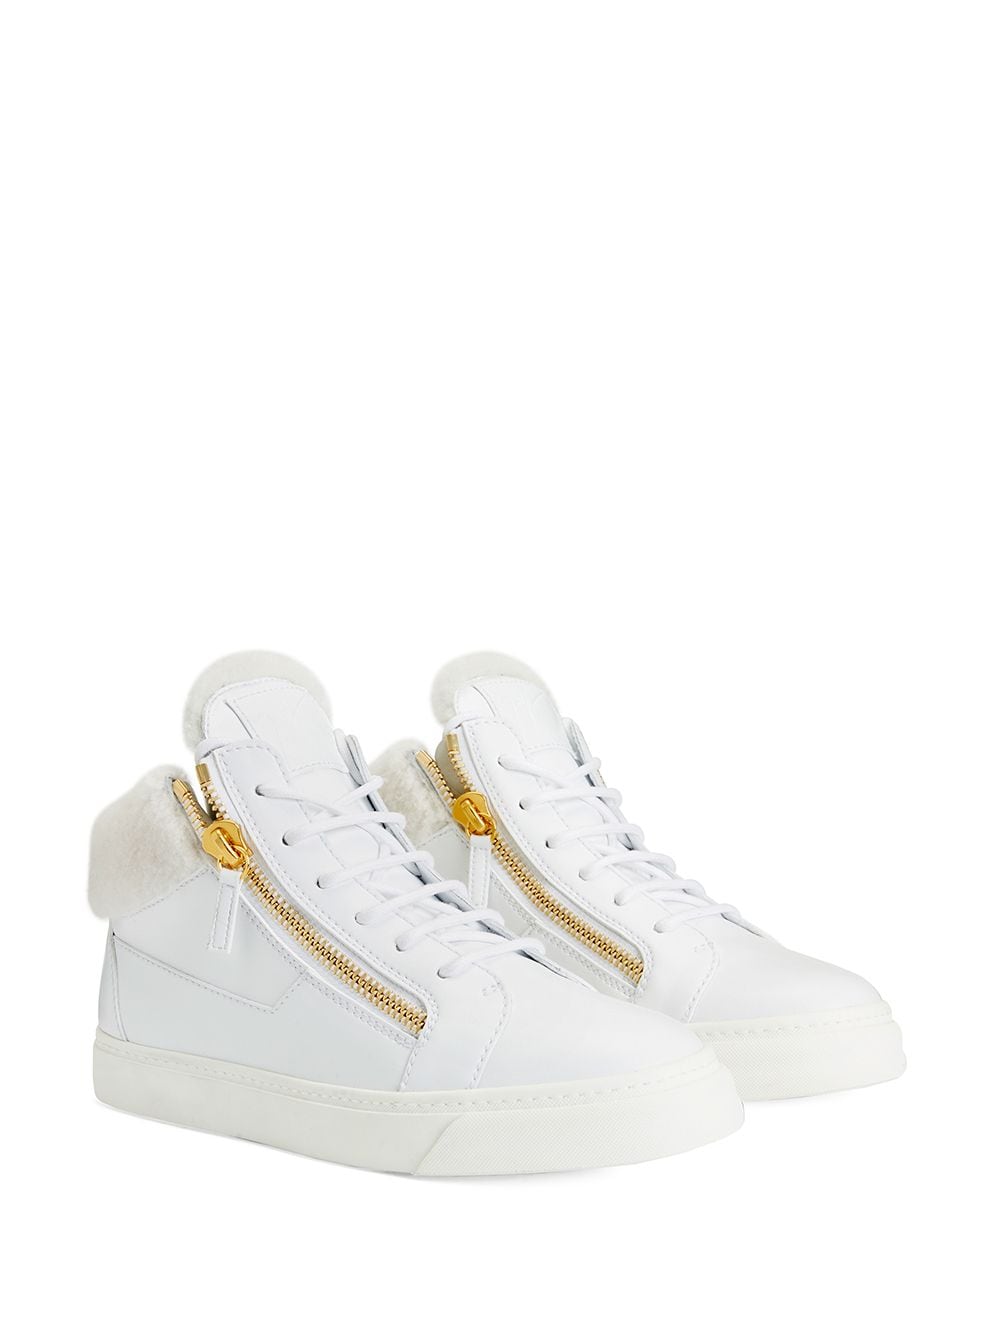 Image 2 of Giuseppe Zanotti Kriss leather mid-top sneakers